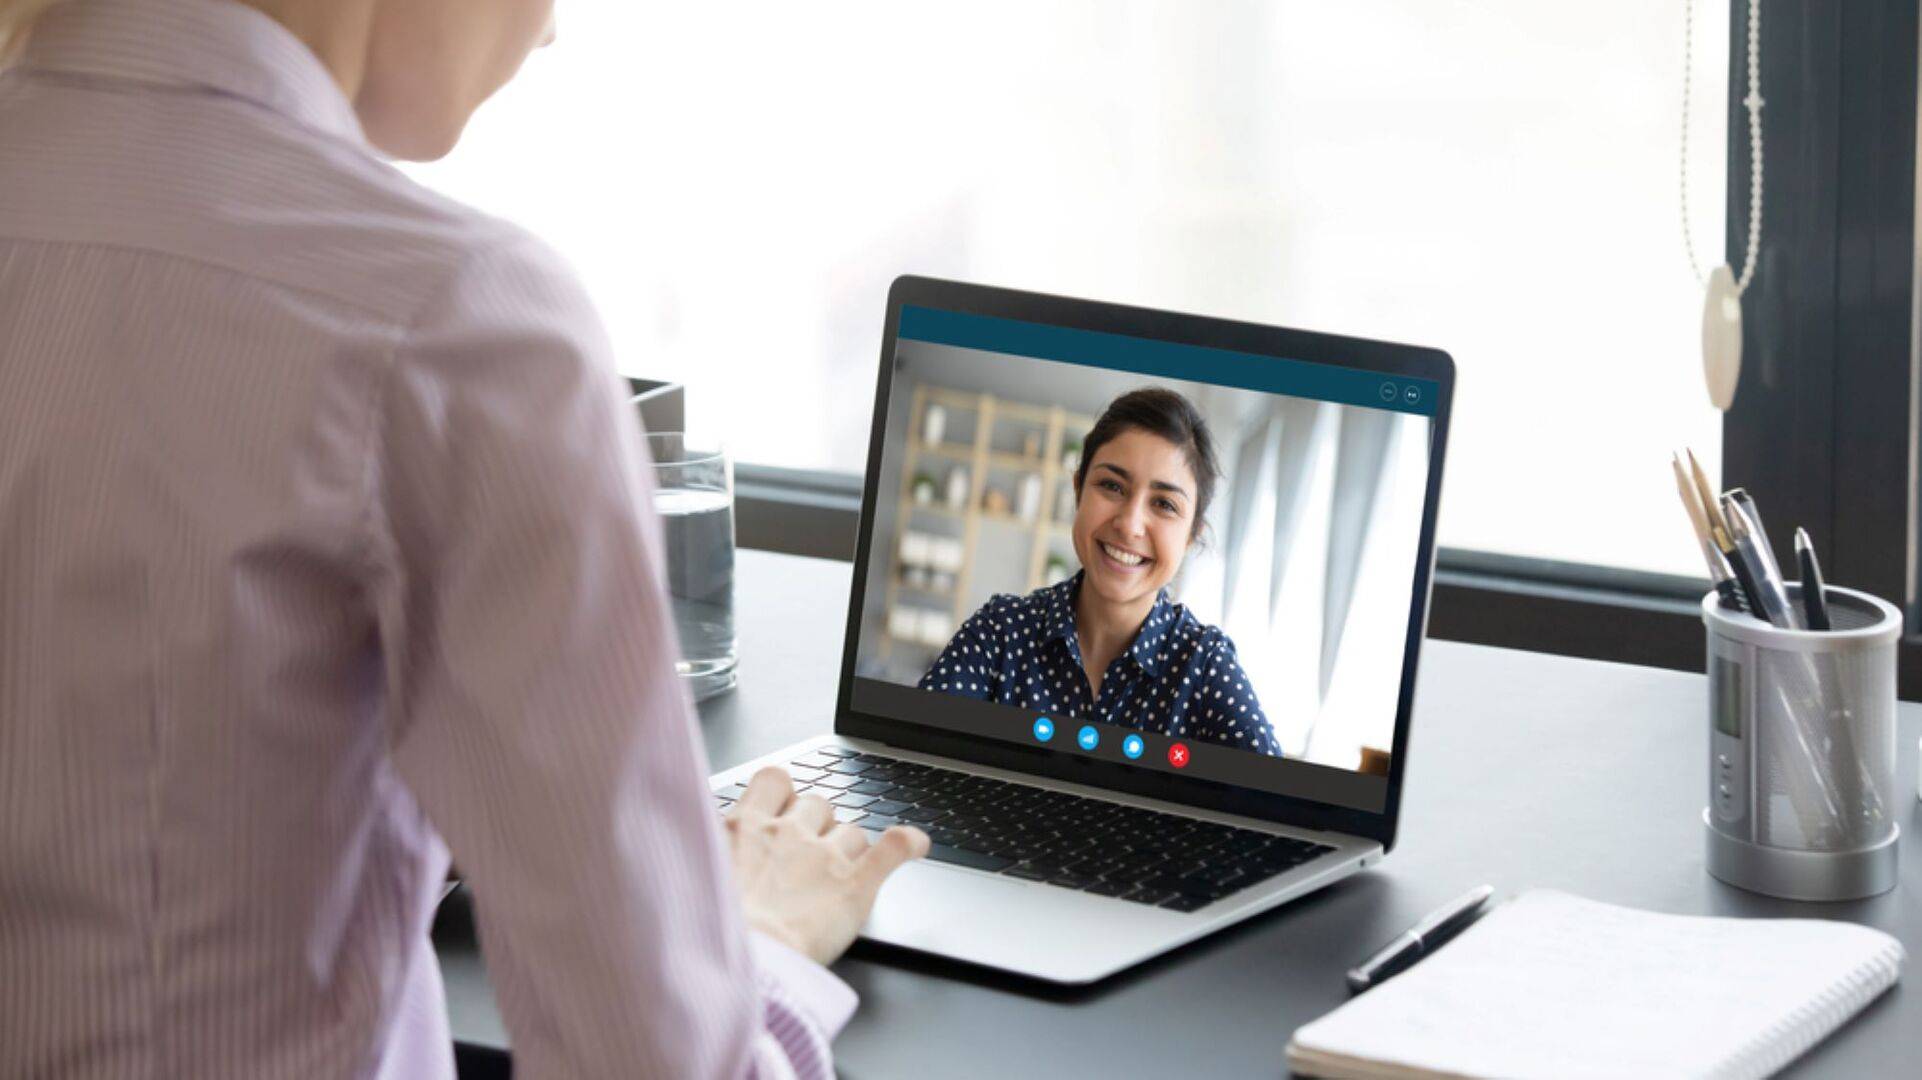 virtual interviews to find the perfect candidate